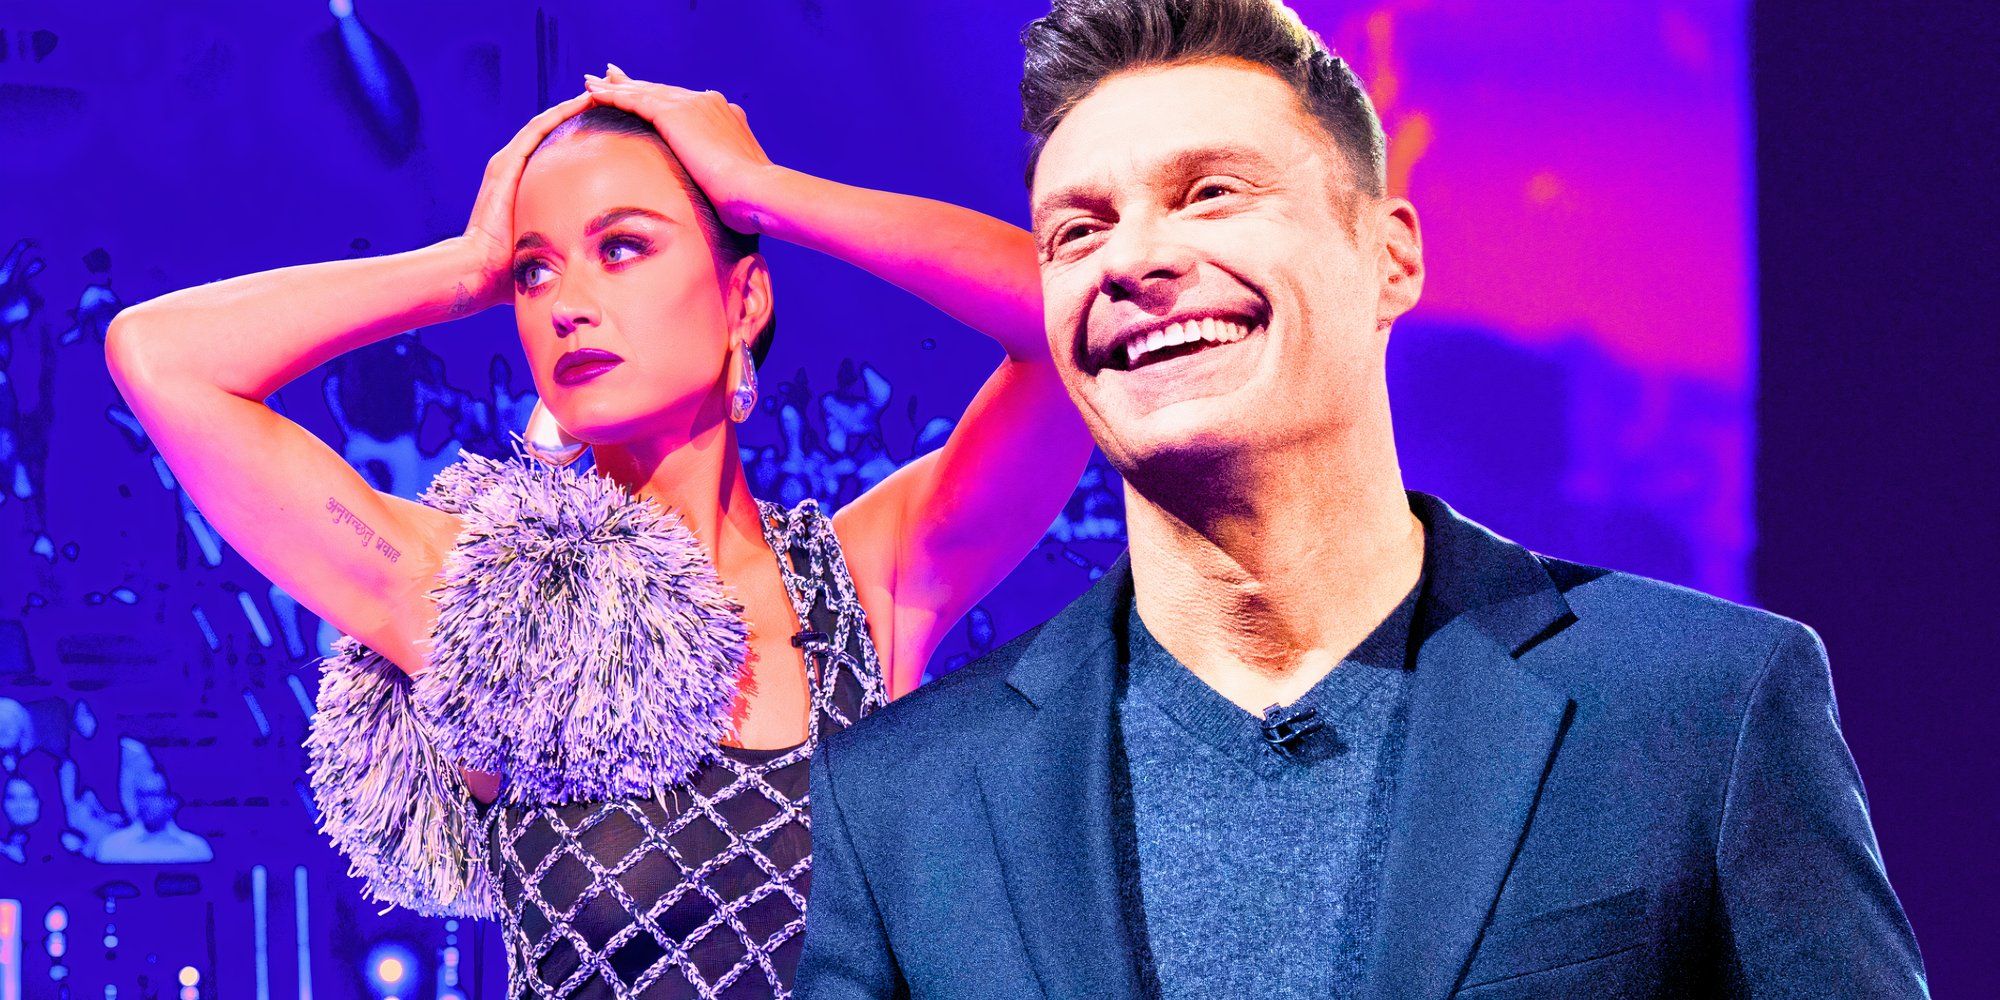 American Idol's Katy Perry holds her hands on top of her head, and Ryan Seacrest smiles widely.